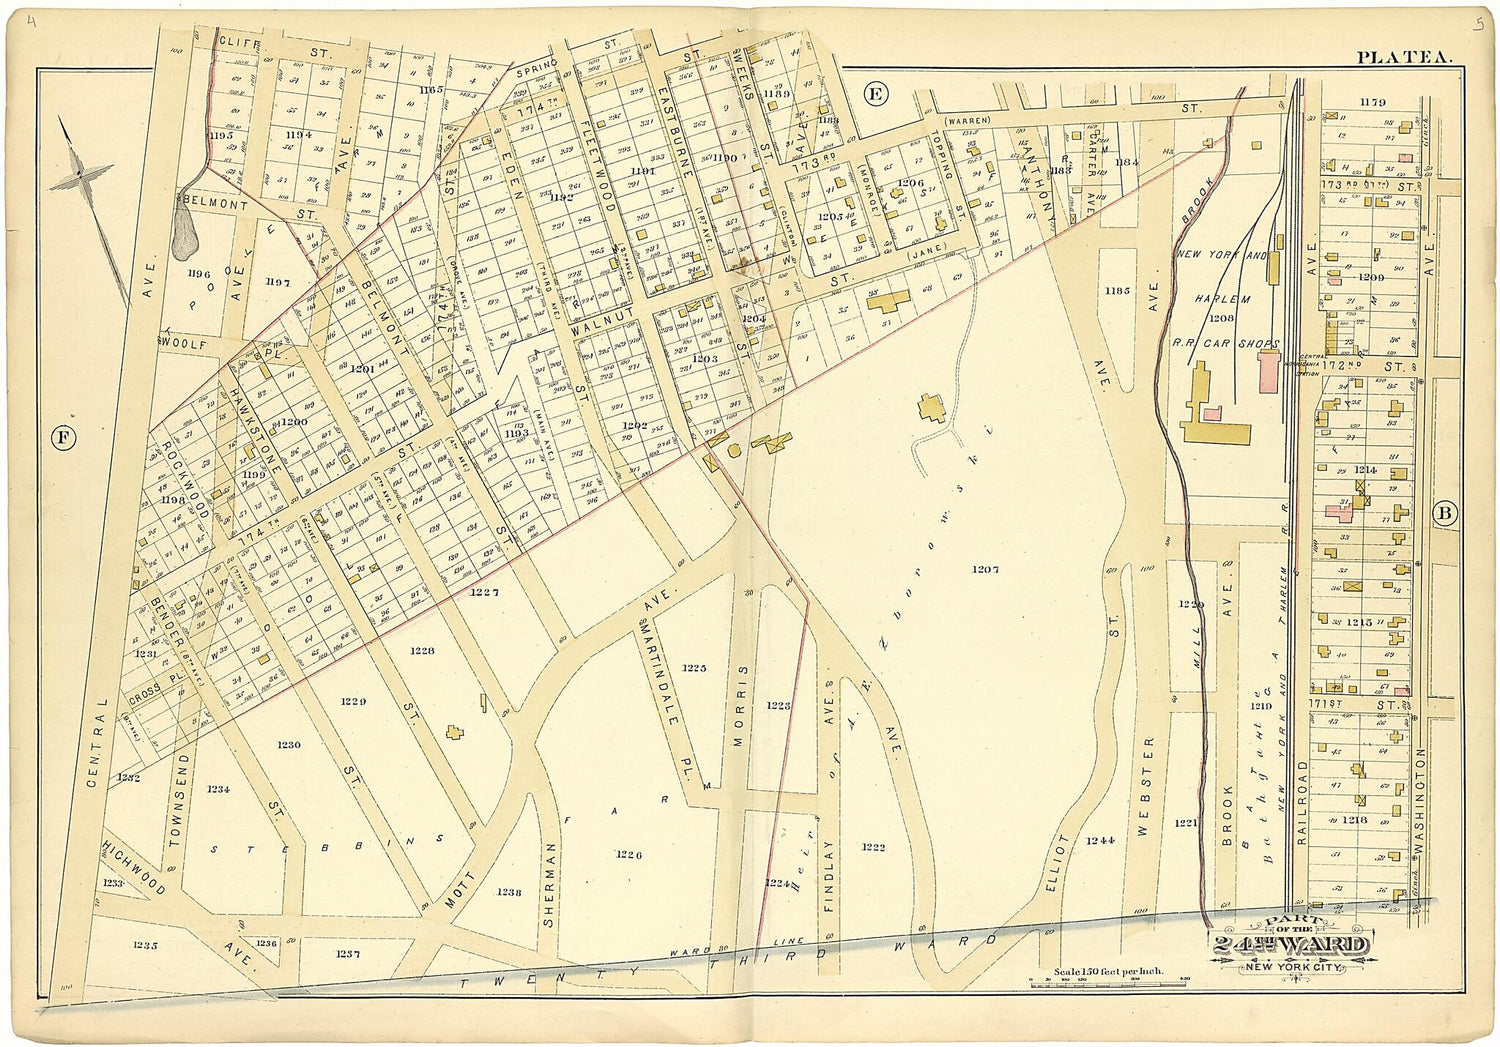 This old map of Part of the 24th Ward New York City - Plate a from Atlas of the Twenty Fourth Ward, New York City from 1882 was created by A. H. (August H.) Mueller in 1882